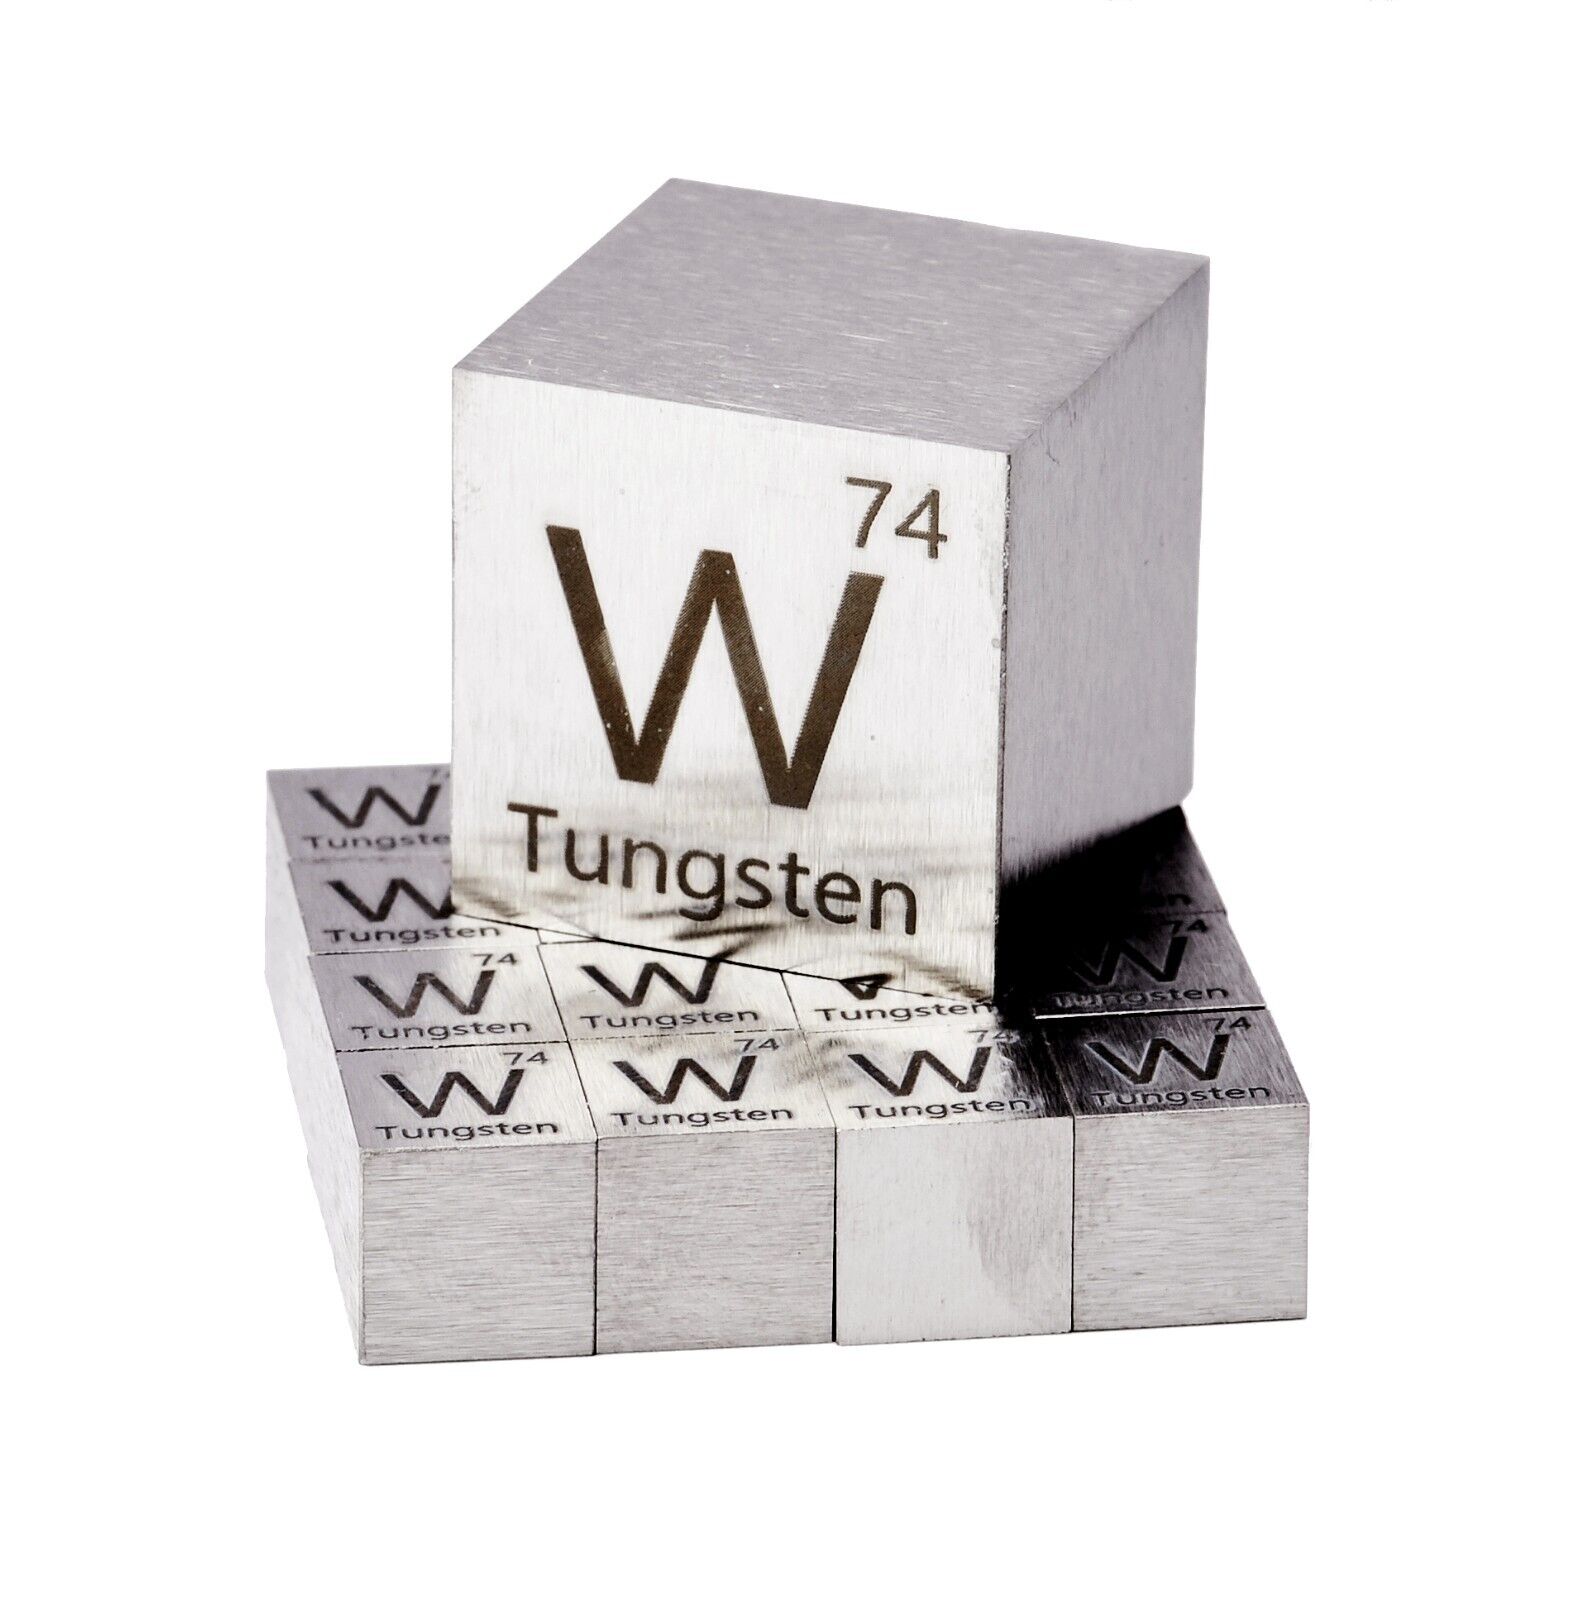 Tungsten Metal 25.4mm 1 Inch Density Cube 99.95% Pure NOT ALLOY OR CARBIDE